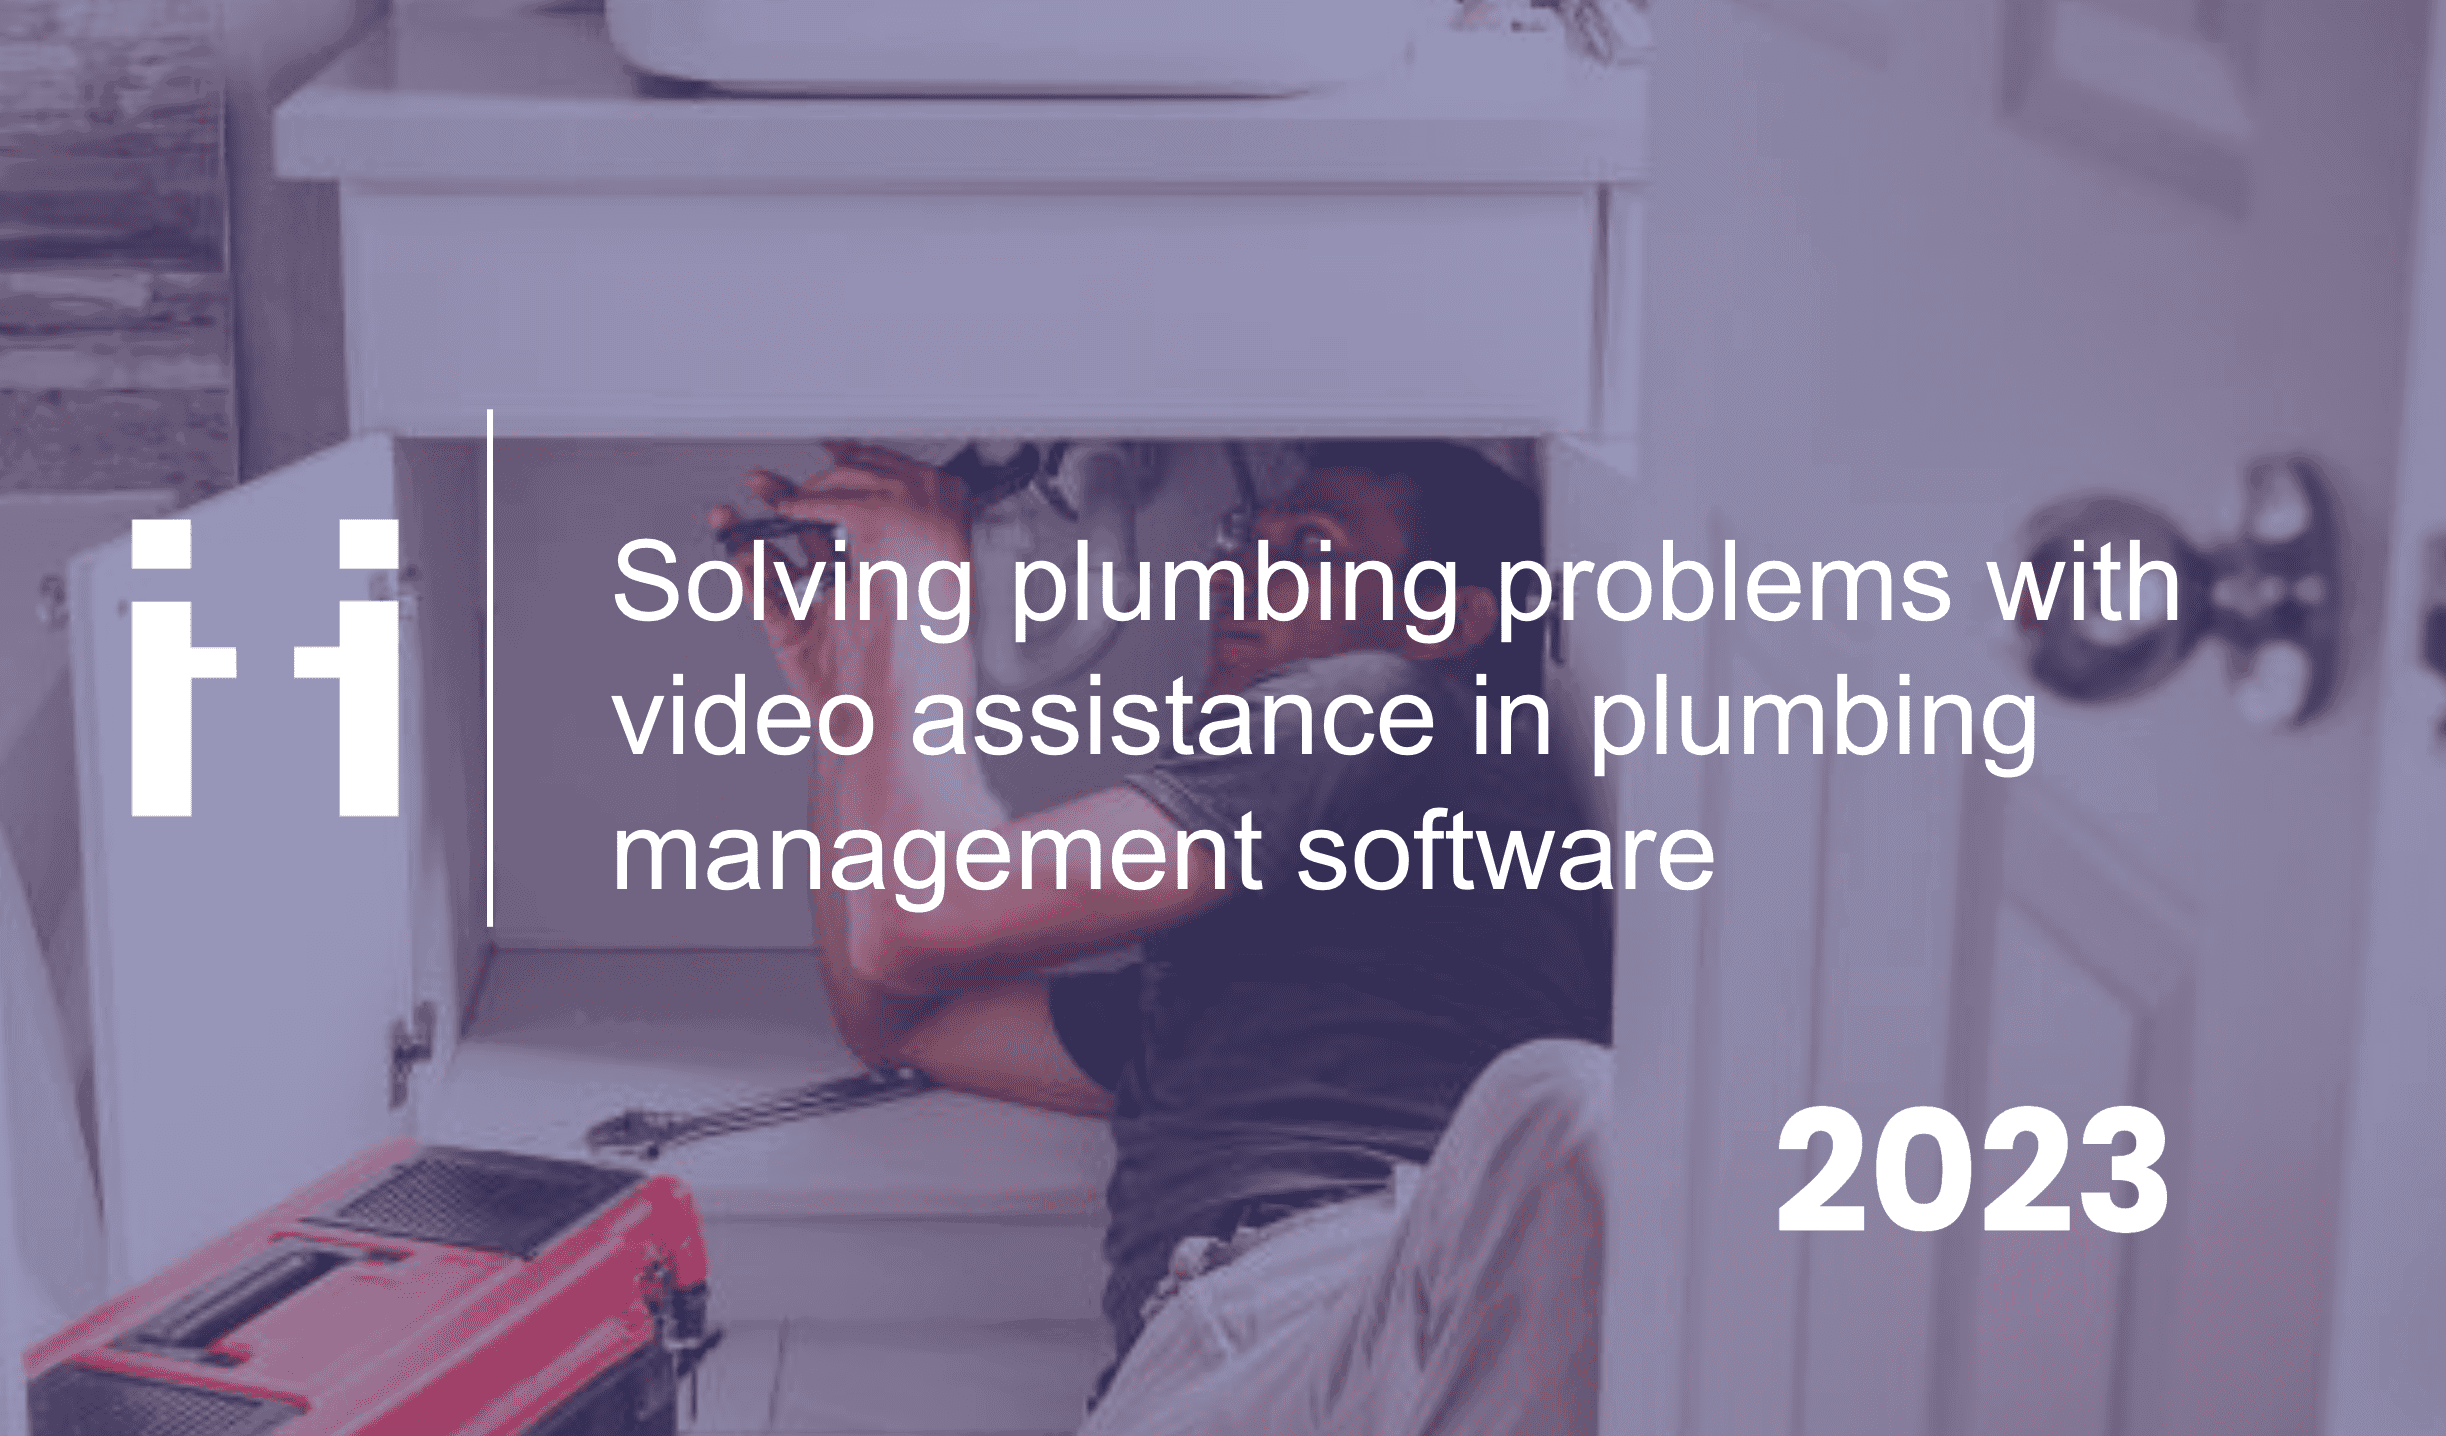 plumbing management software with video assistance benefits